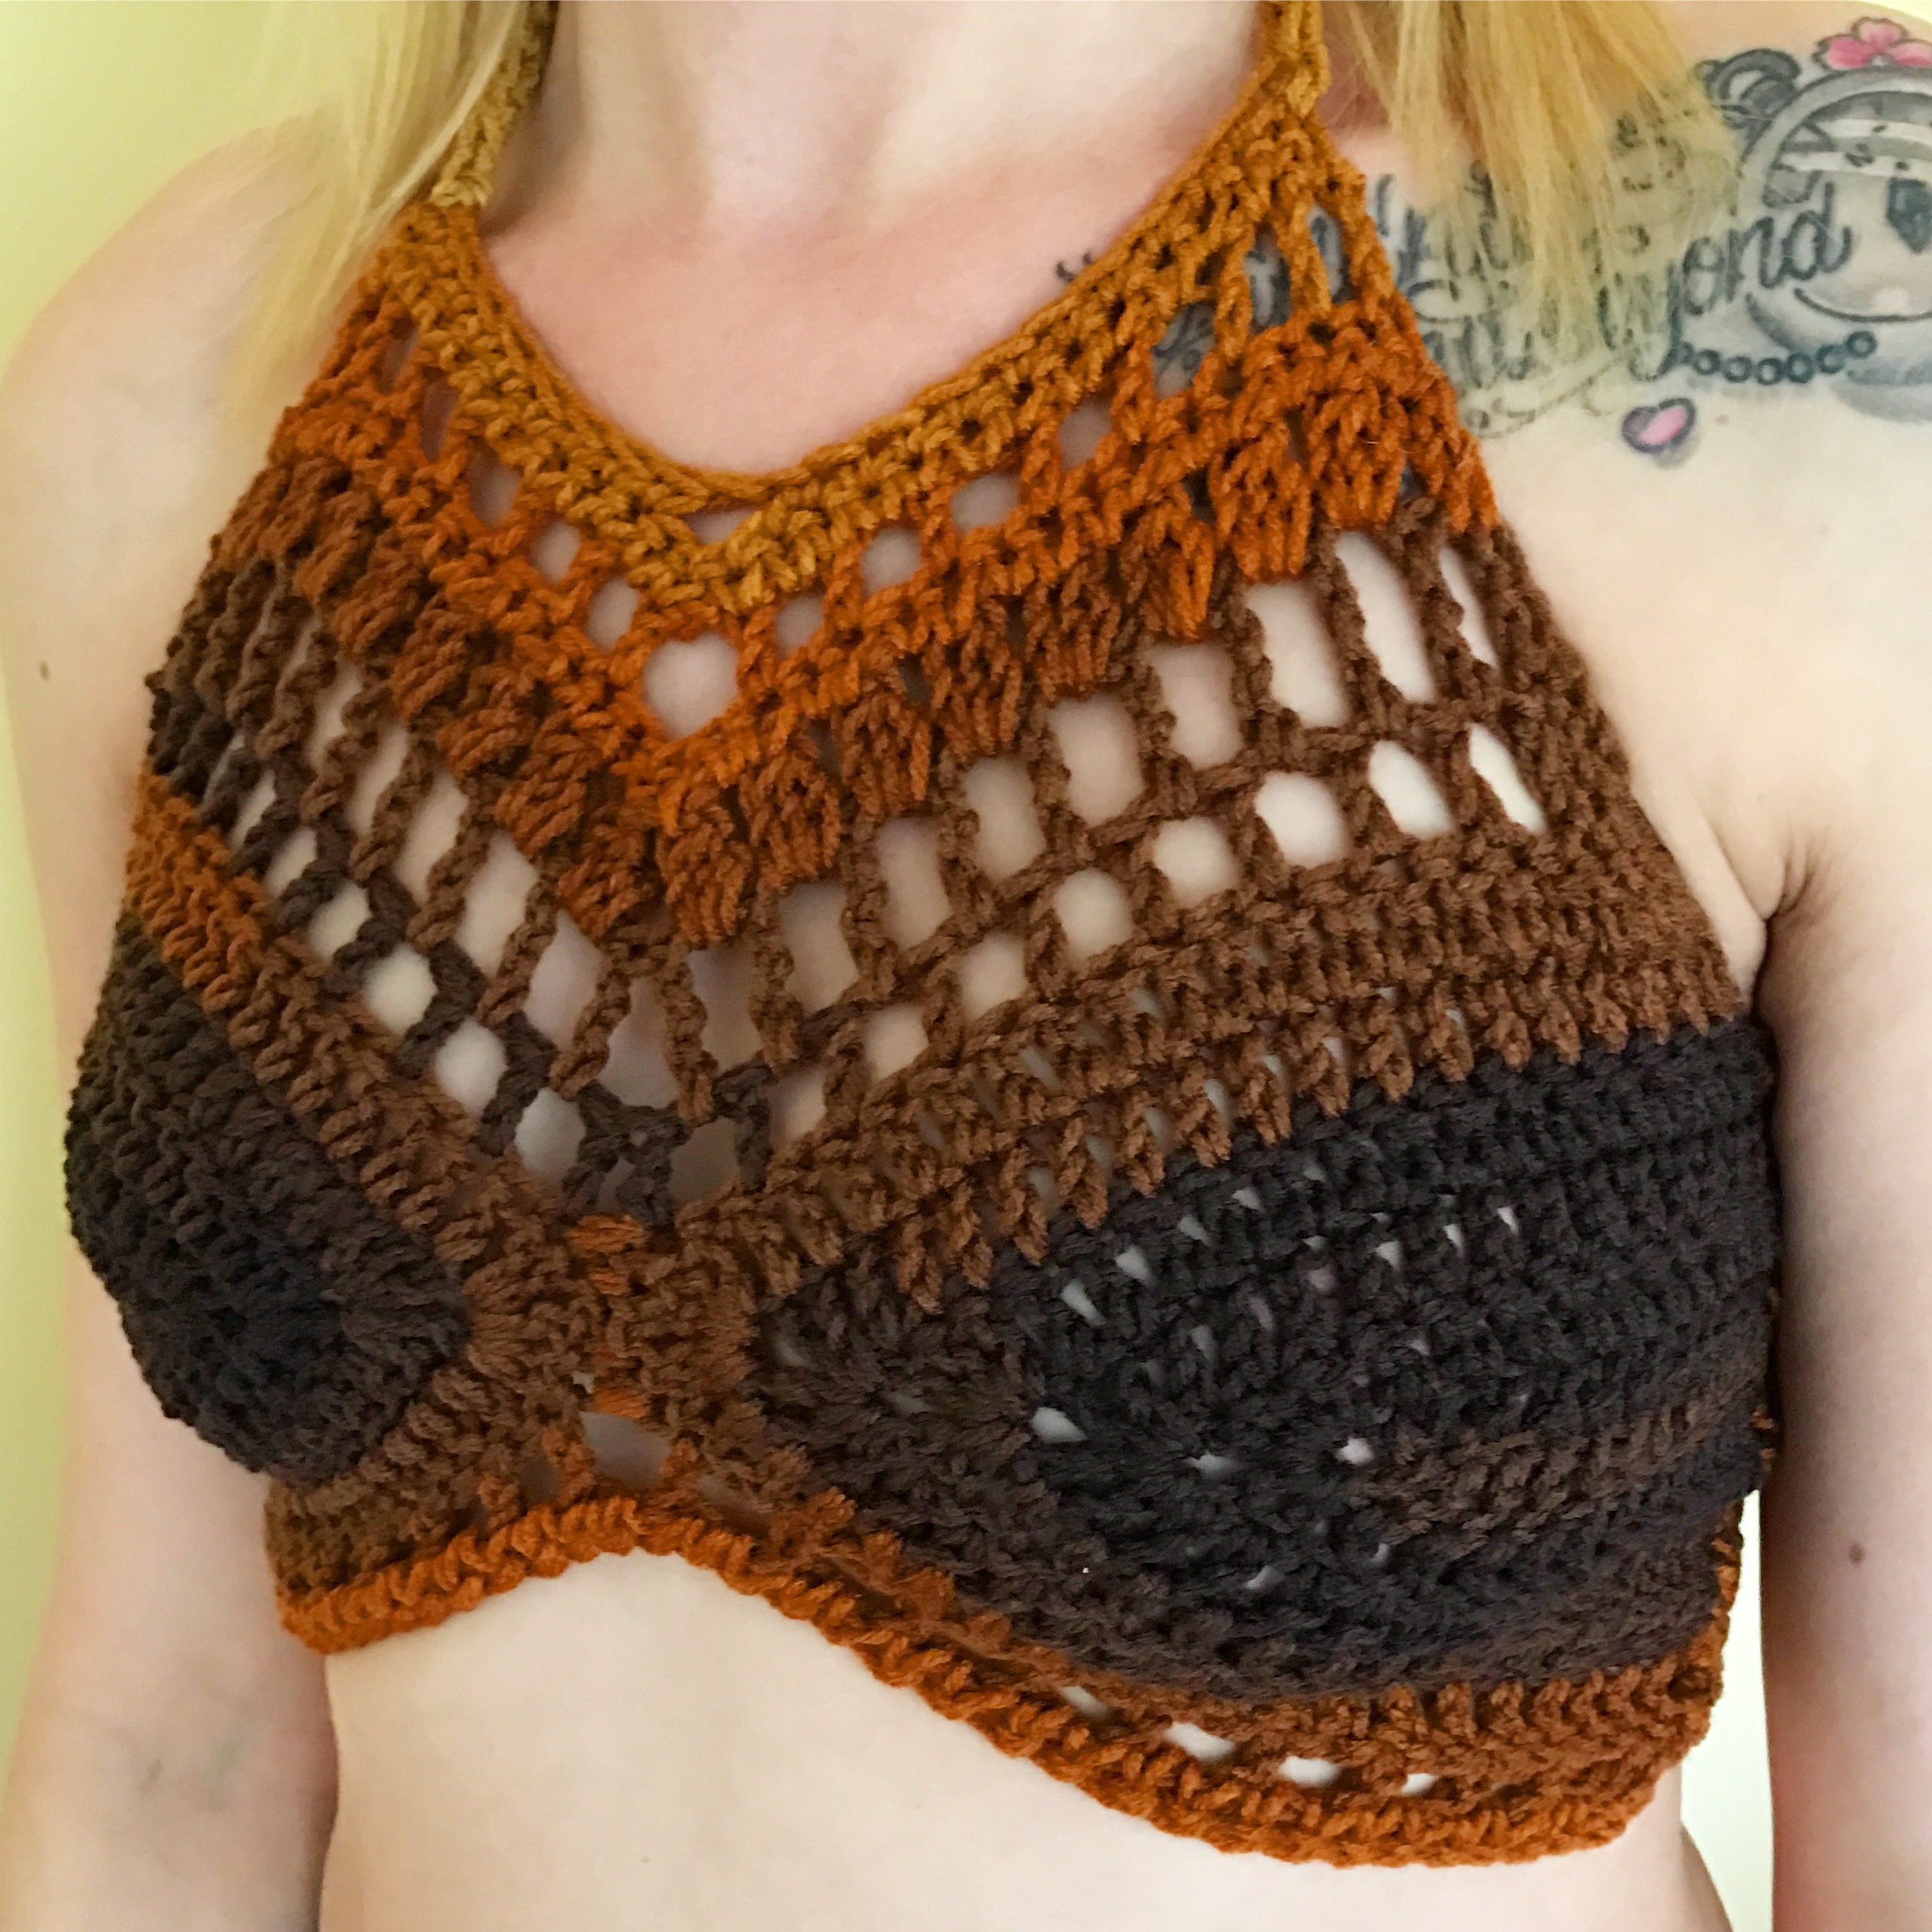 Crochet bralette cop top guvaberry – guavaberry